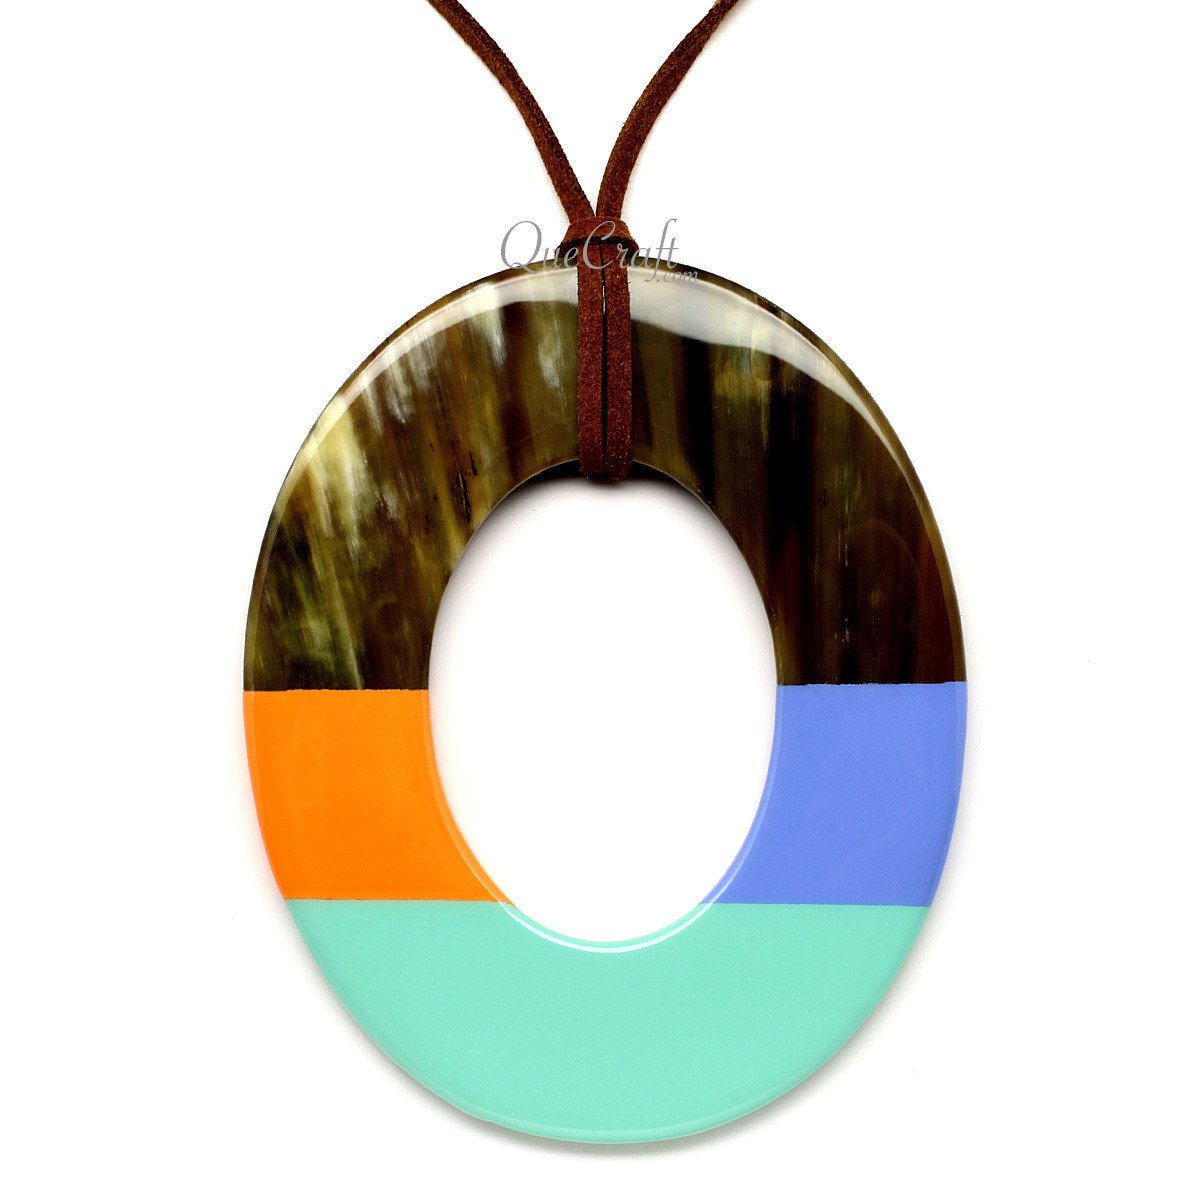 Horn & Lacquer Pendant #12599 - HORN JEWELRY